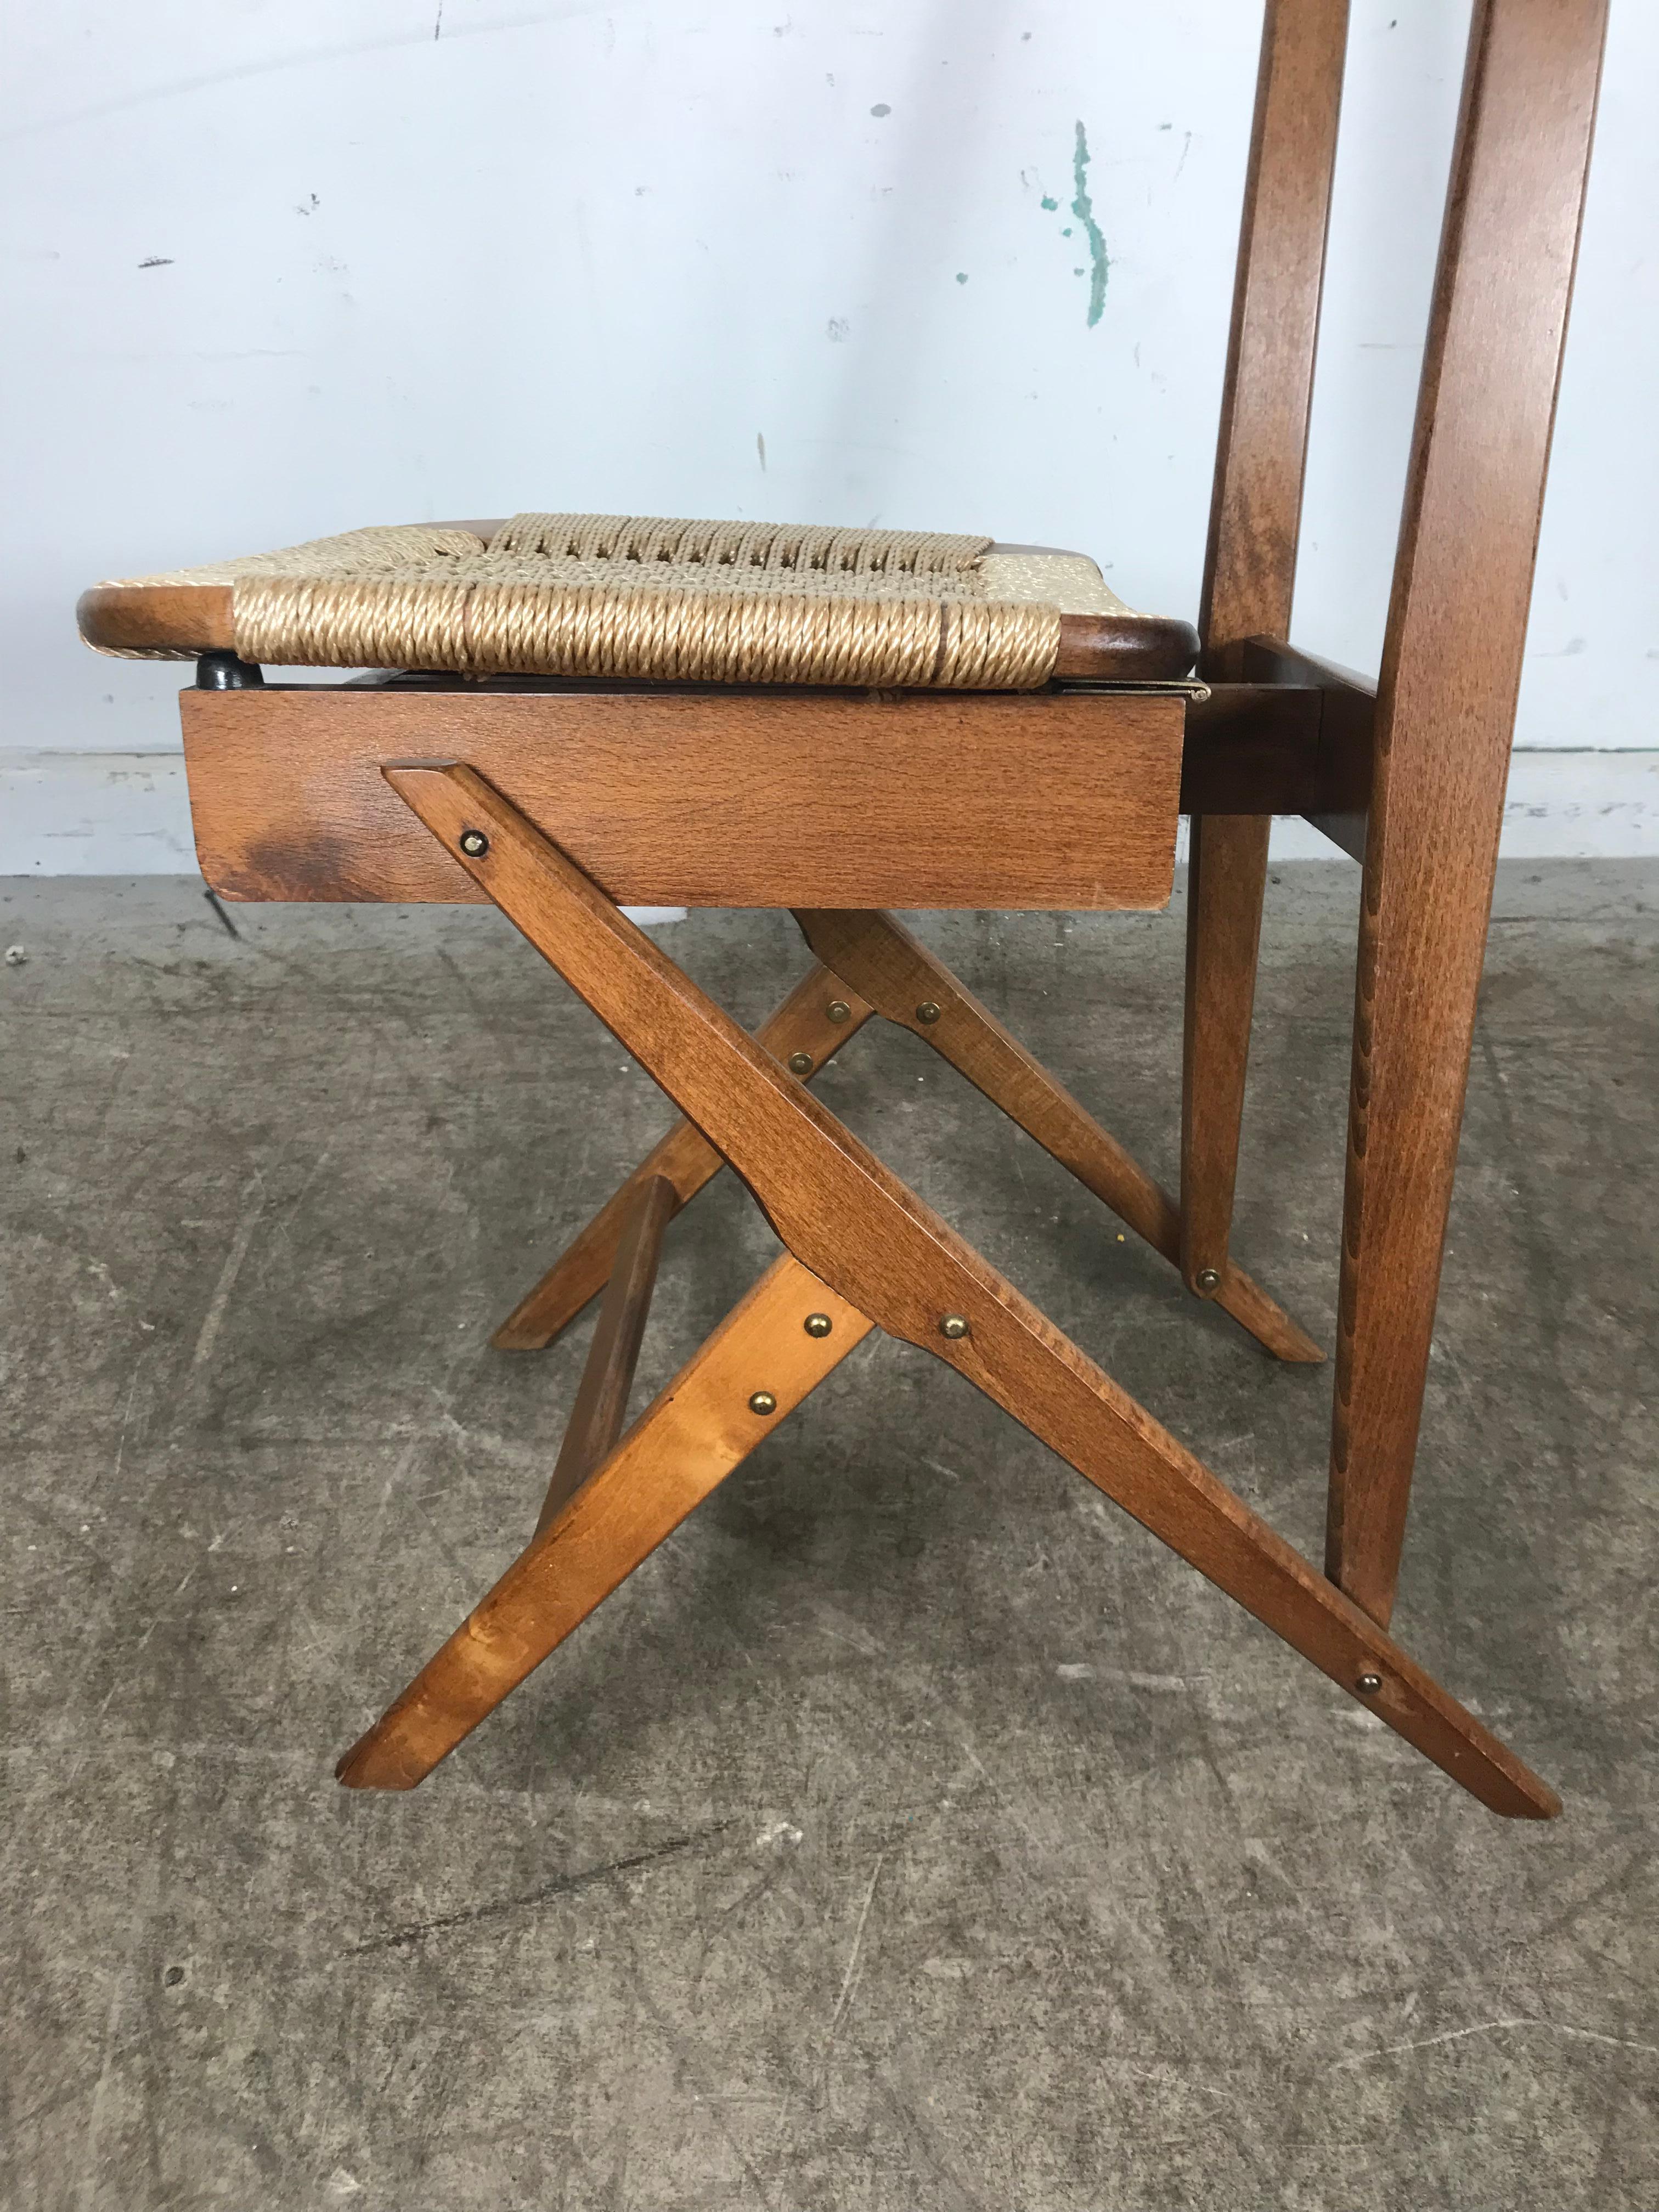 Mid-Century Modern wood and rope valet, manner of Ico Parisi and Luisa Fratelli Ruggitti. Features rush seat that lifts up to unveil two small compartments for storing items. Beautiful wood grain sculptural design, pull-out knobs for hanging hats,